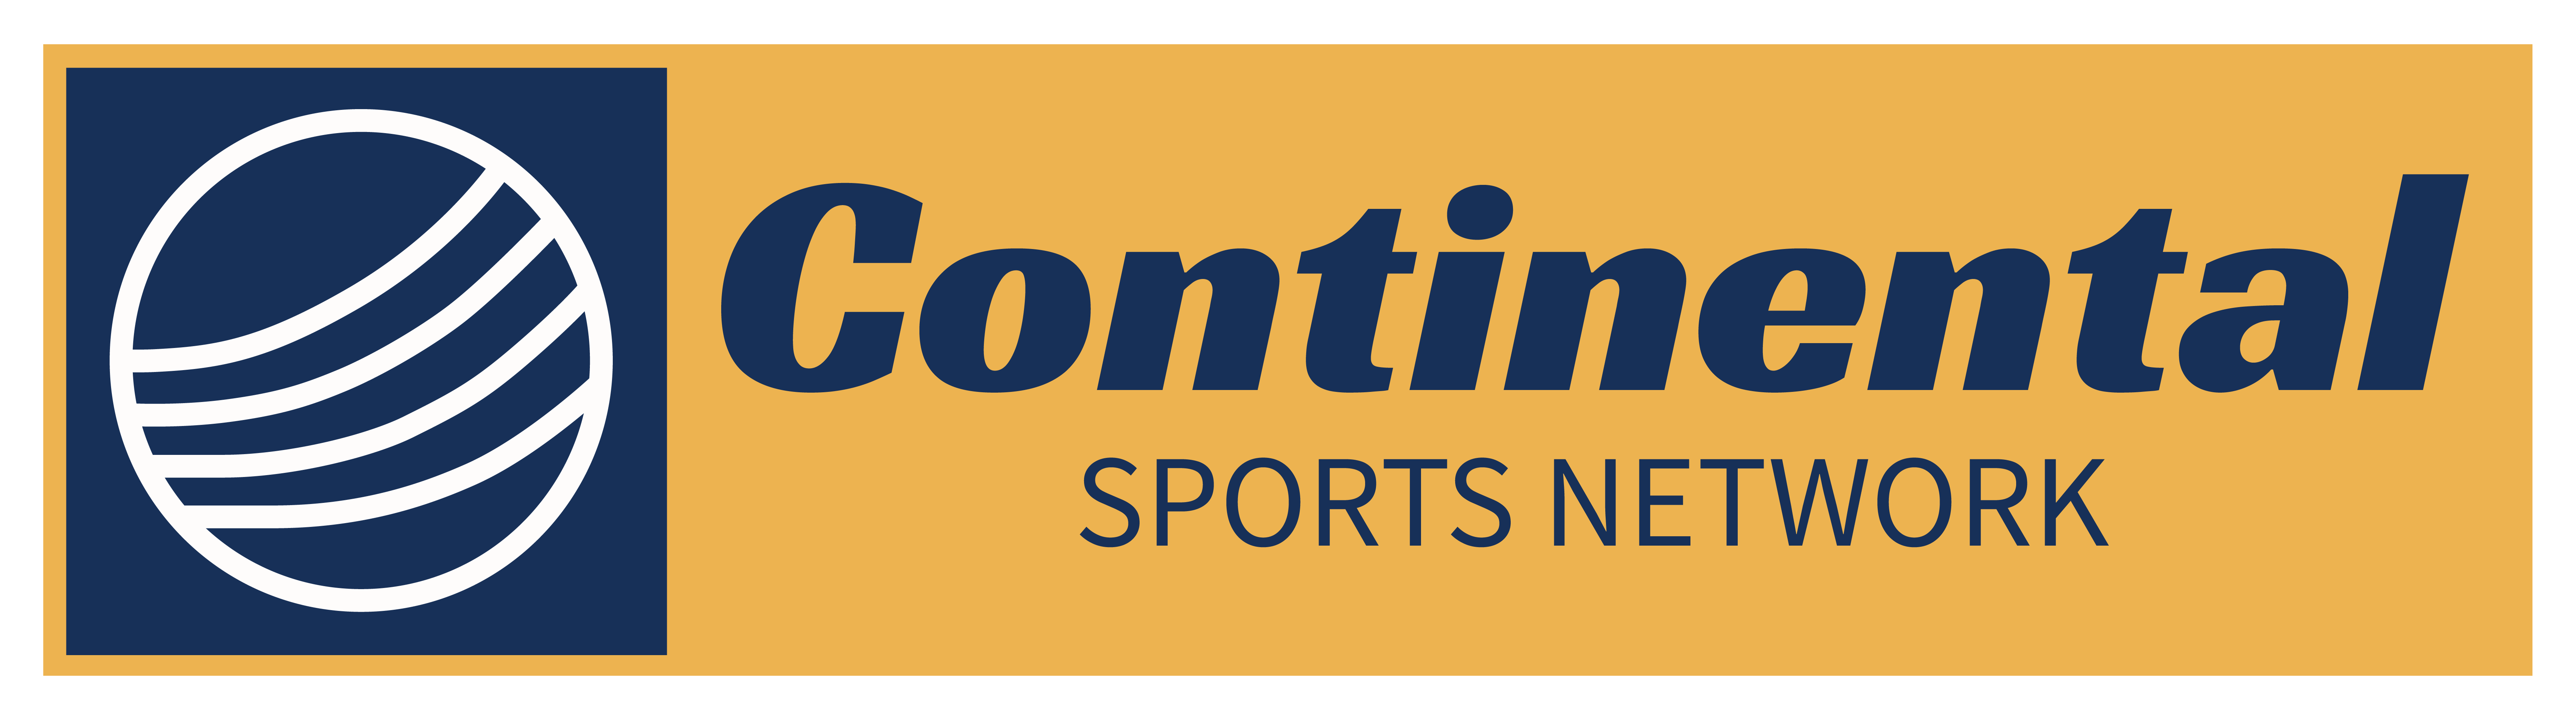 Continental Sports Network